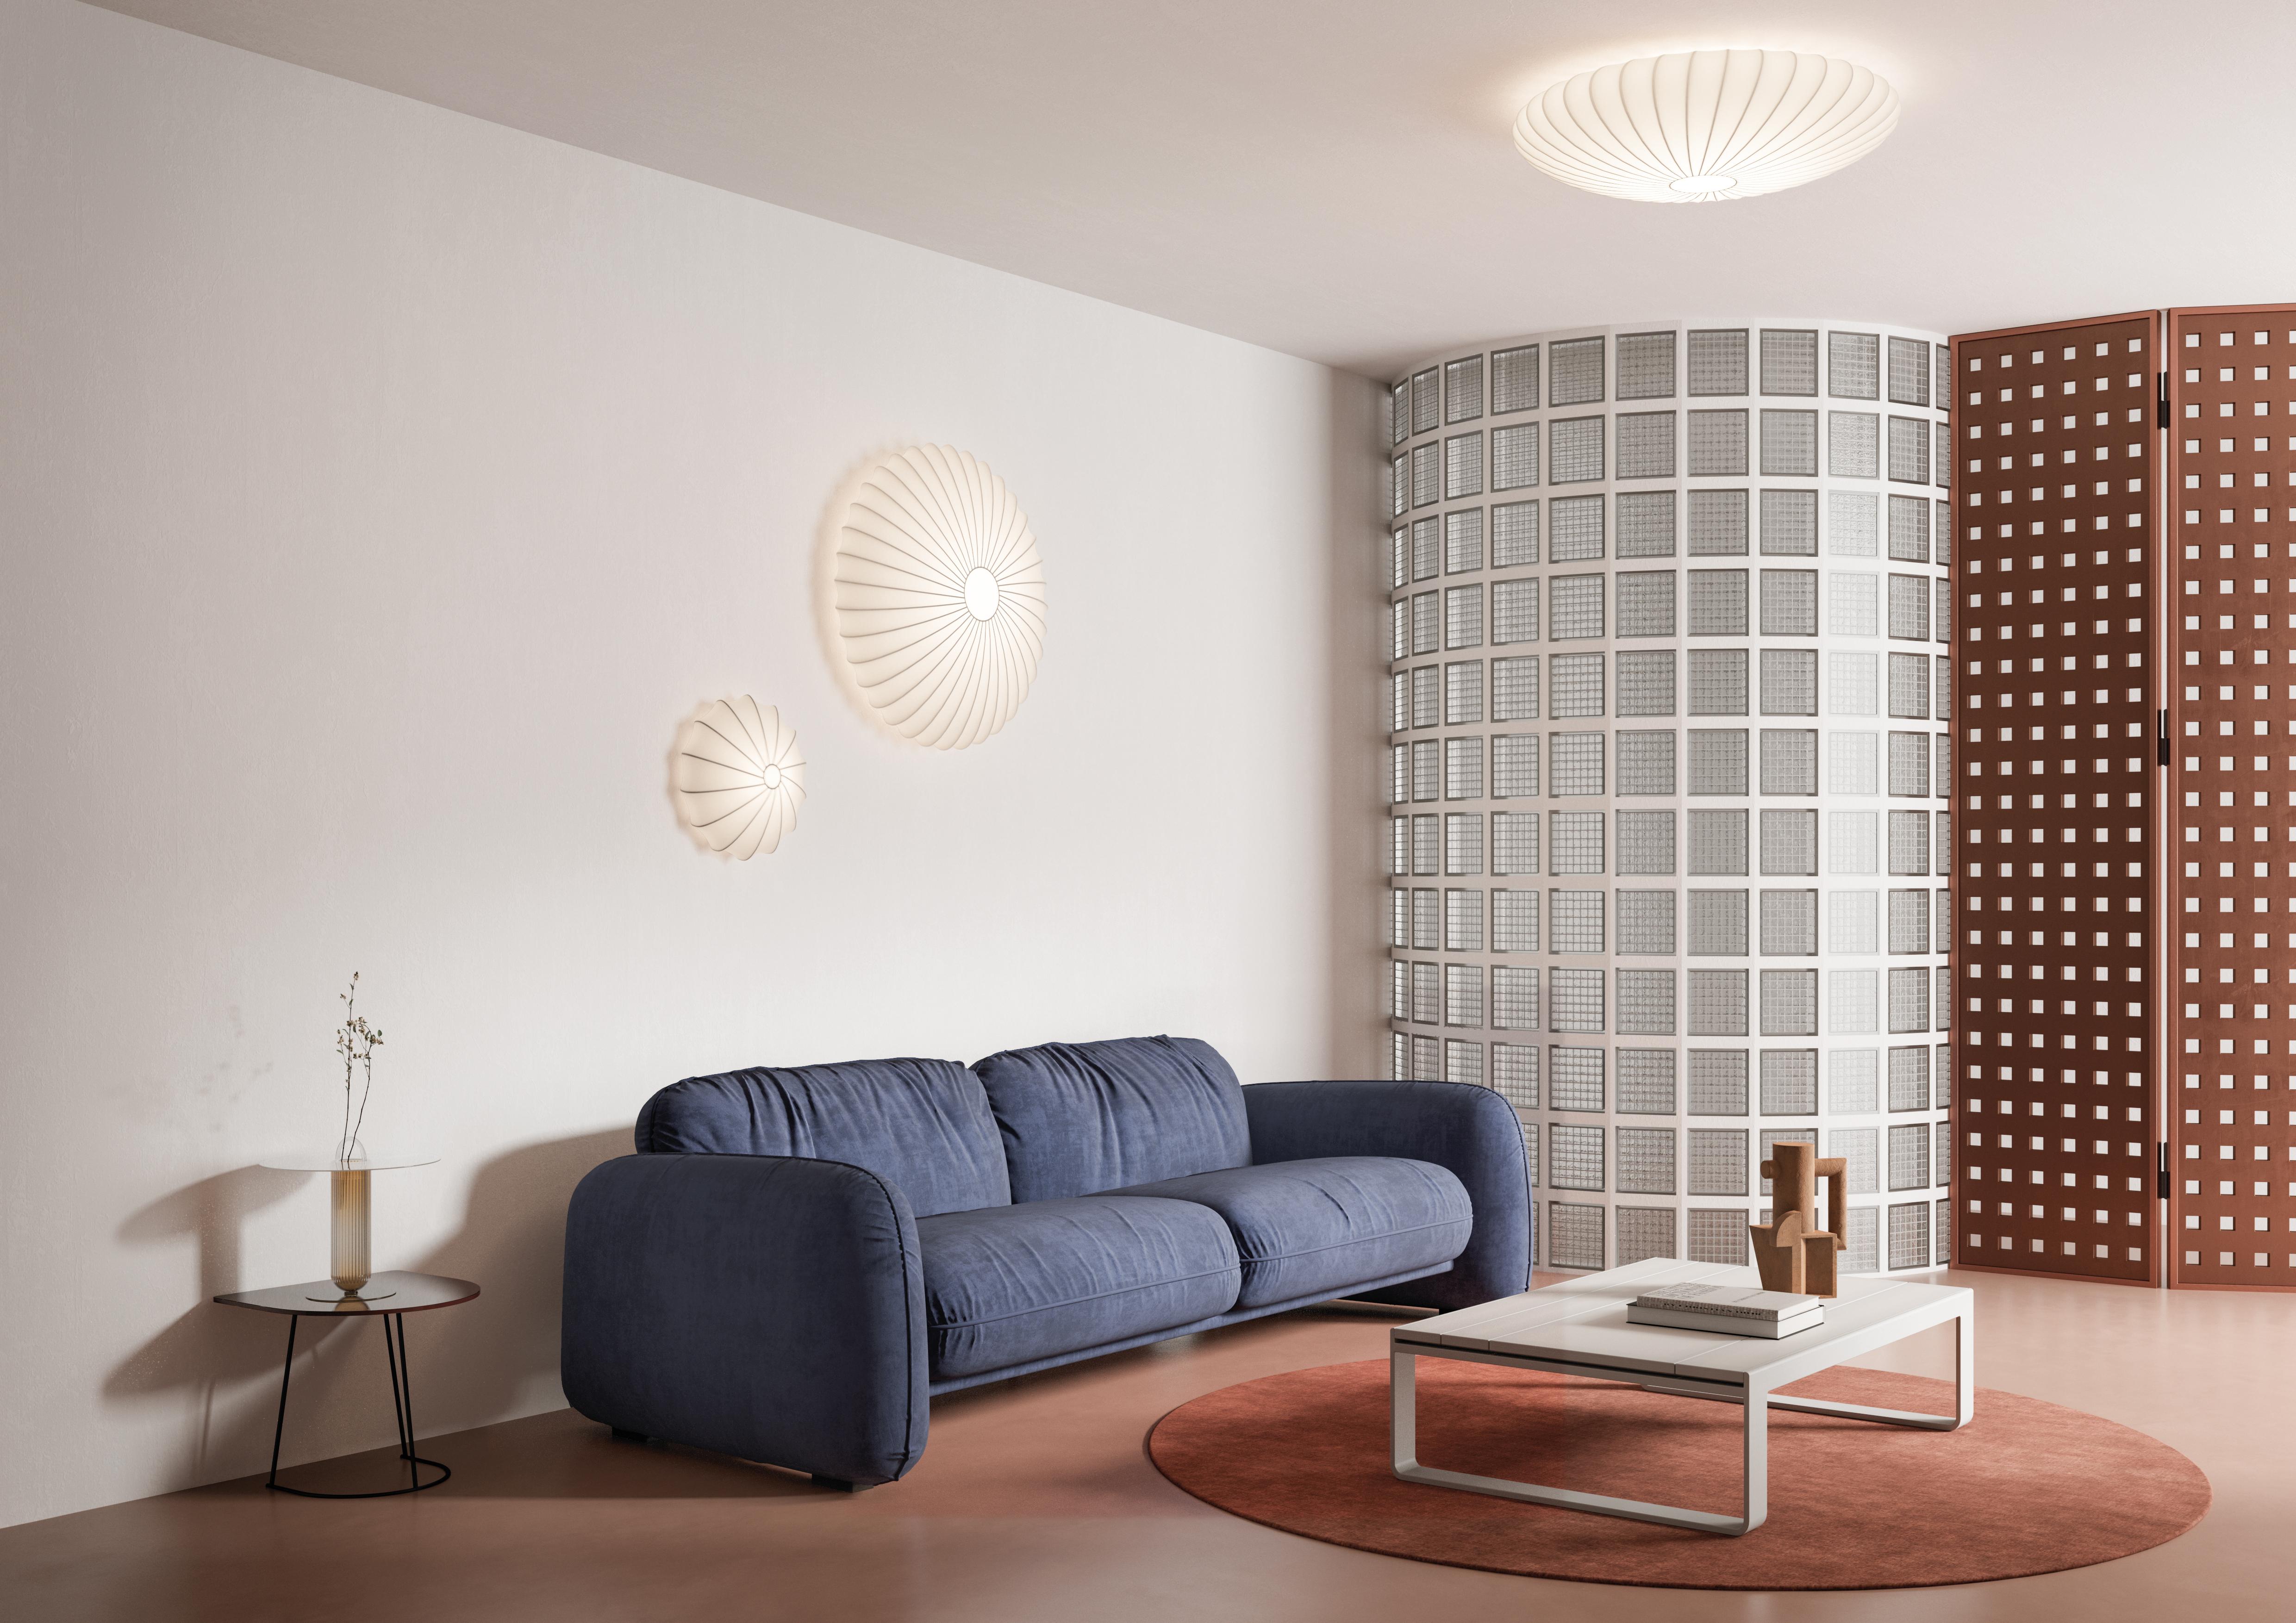 Axolight Muse Large Ceiling Light in Orange with White Metal Finish by Sandro Santantonio

Cheerfulness meets inspiration and together they create Muse. Energetic colours, sinuous lines, fluid fabric come together, leaving the imagination completely